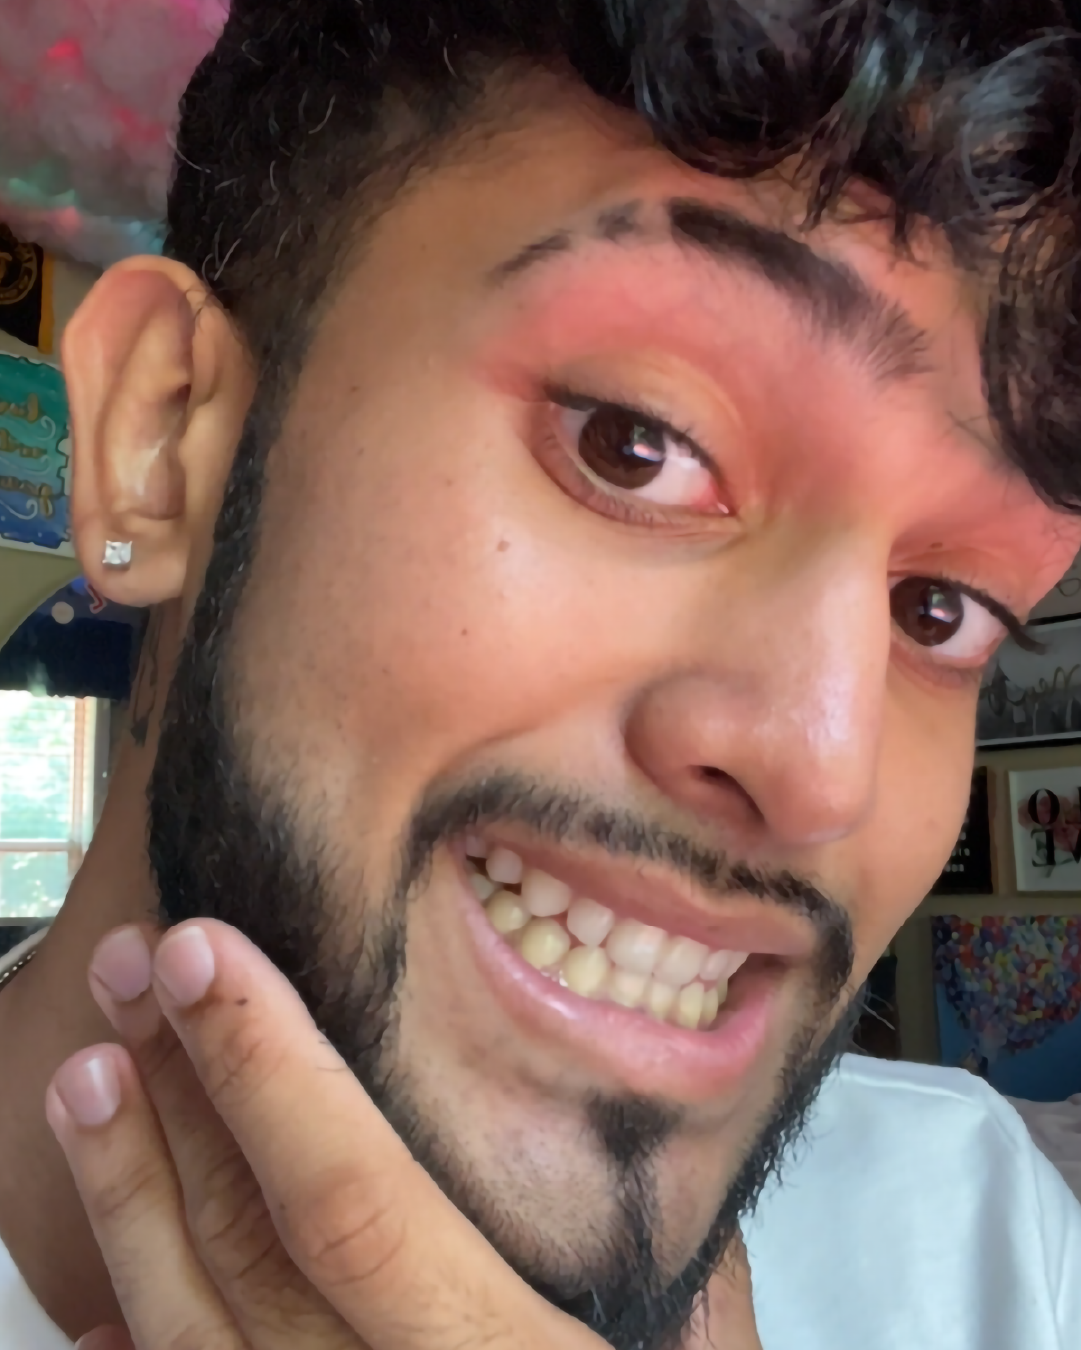 Man with a beard smiling at the camera, showing off pink eyeshadow.